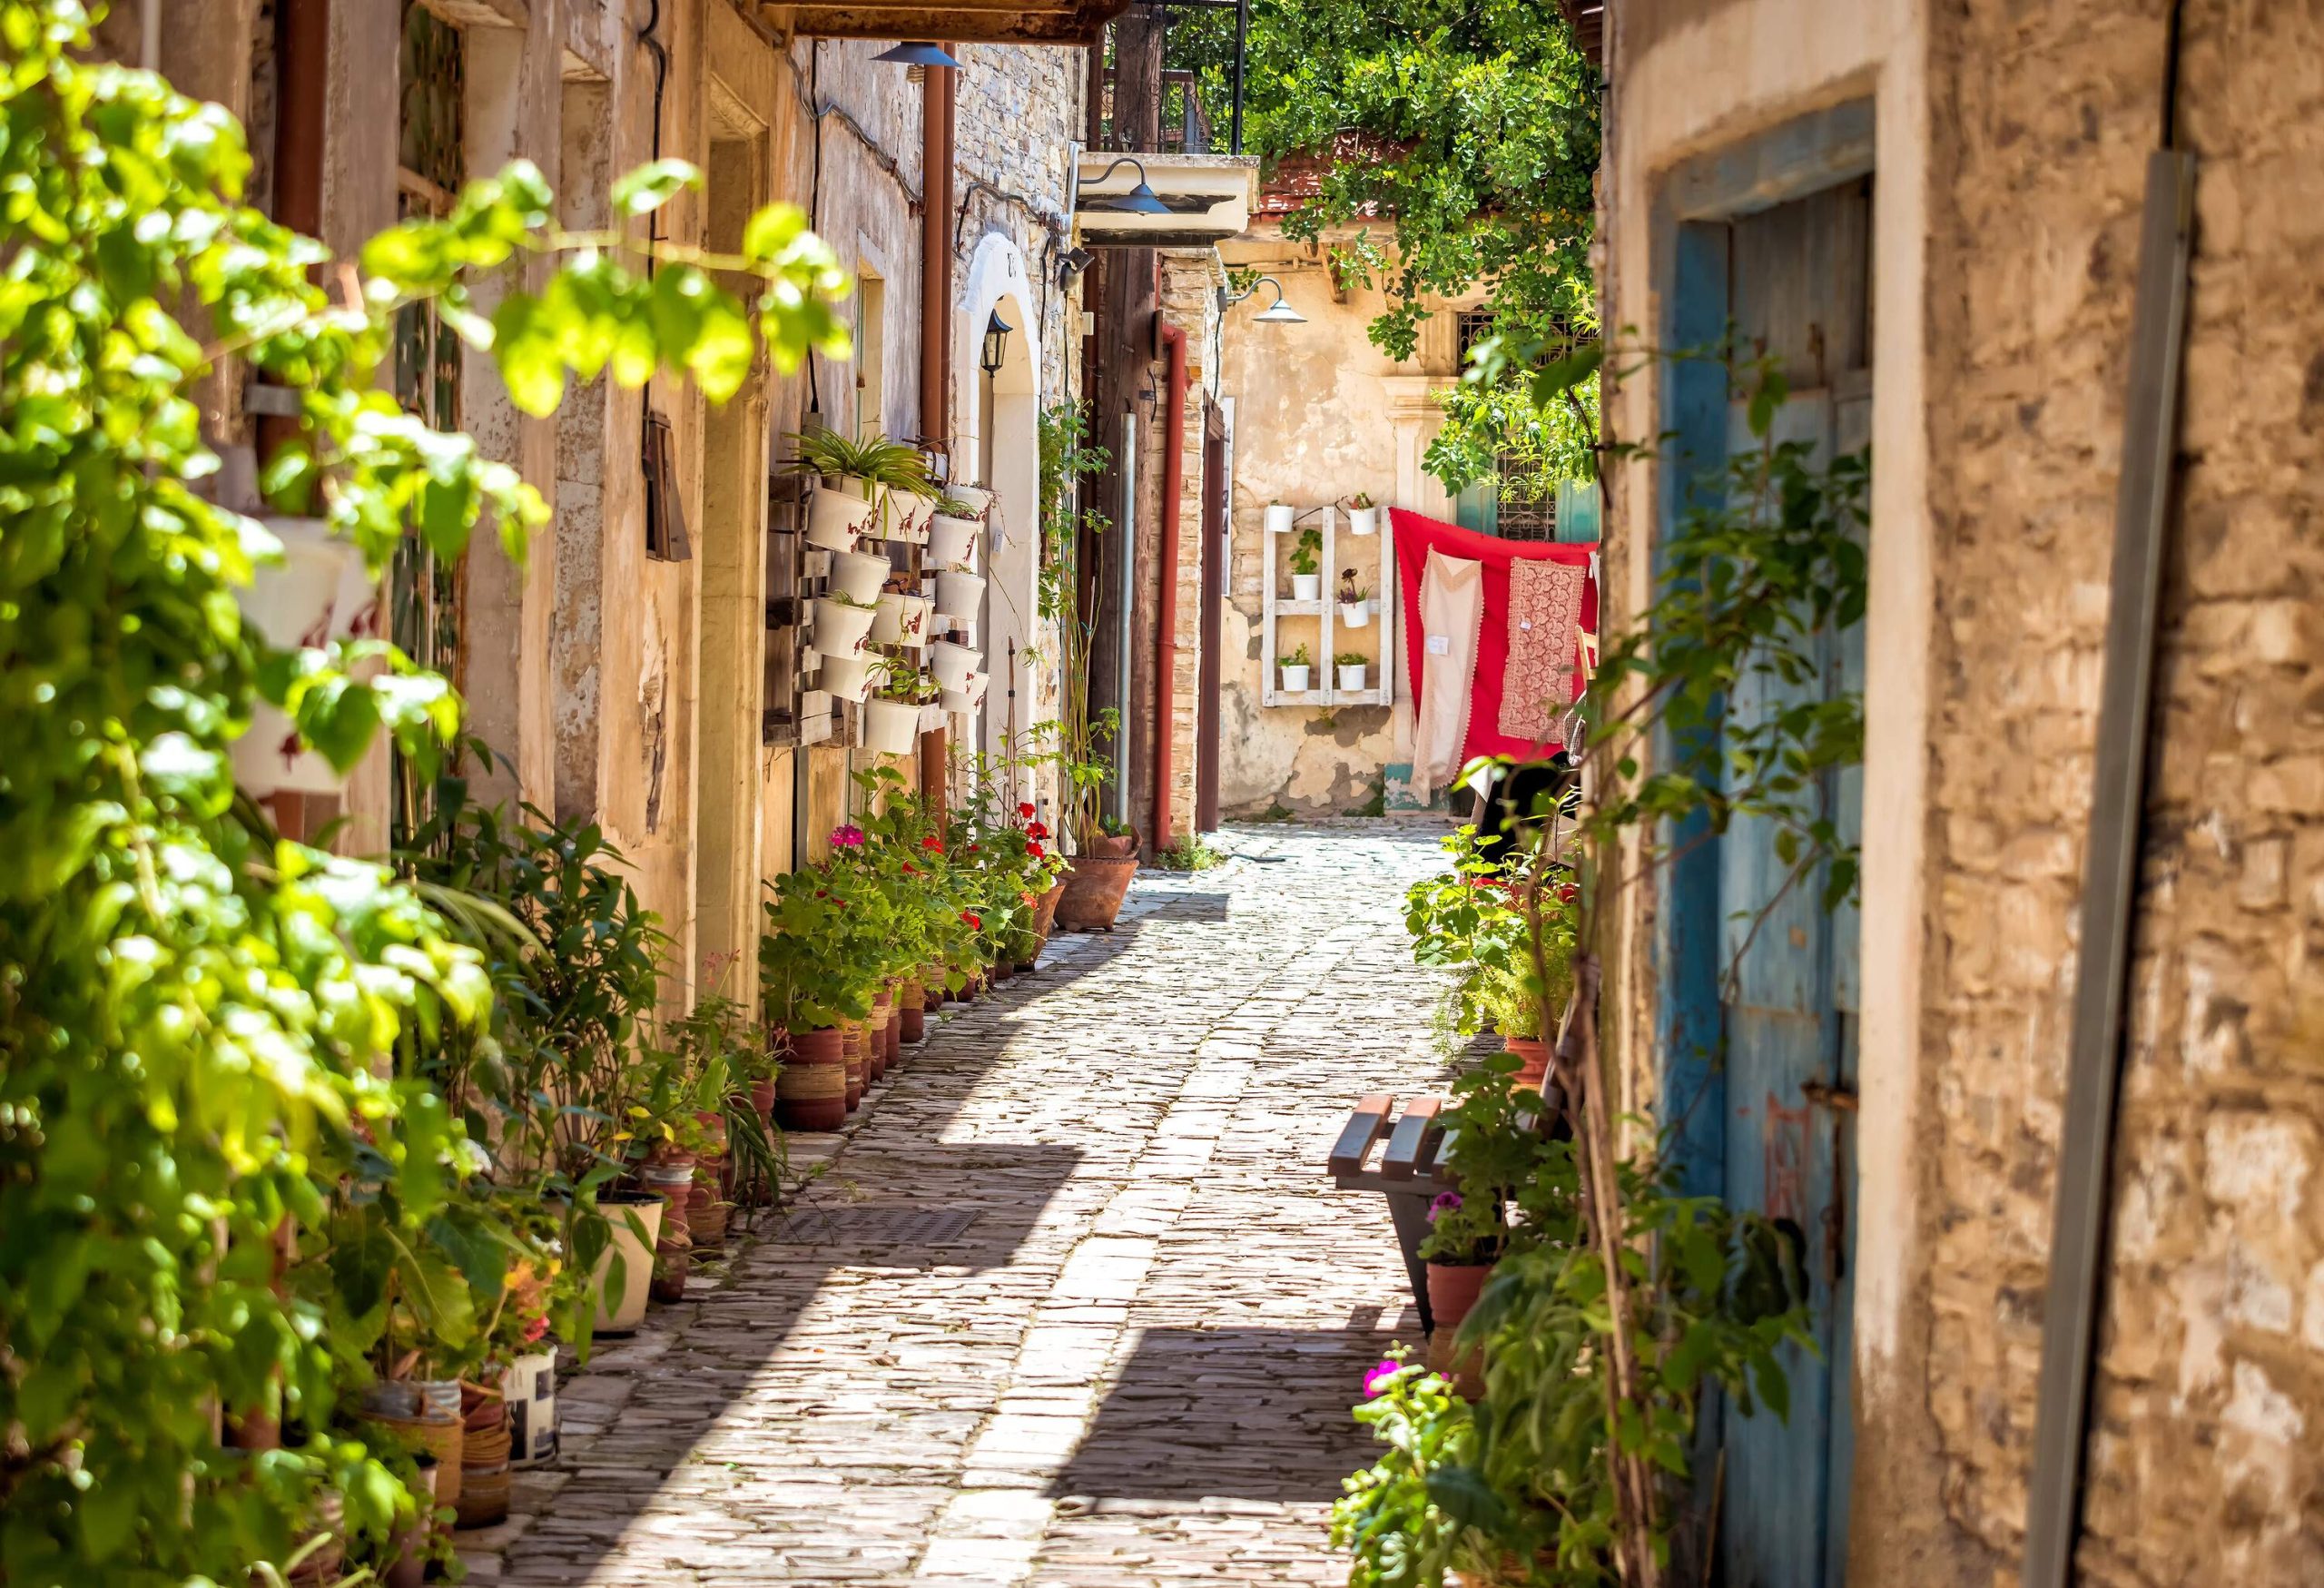 A small cobblestone alleyway flanked with stone homes, the walls adorned with potted plants.